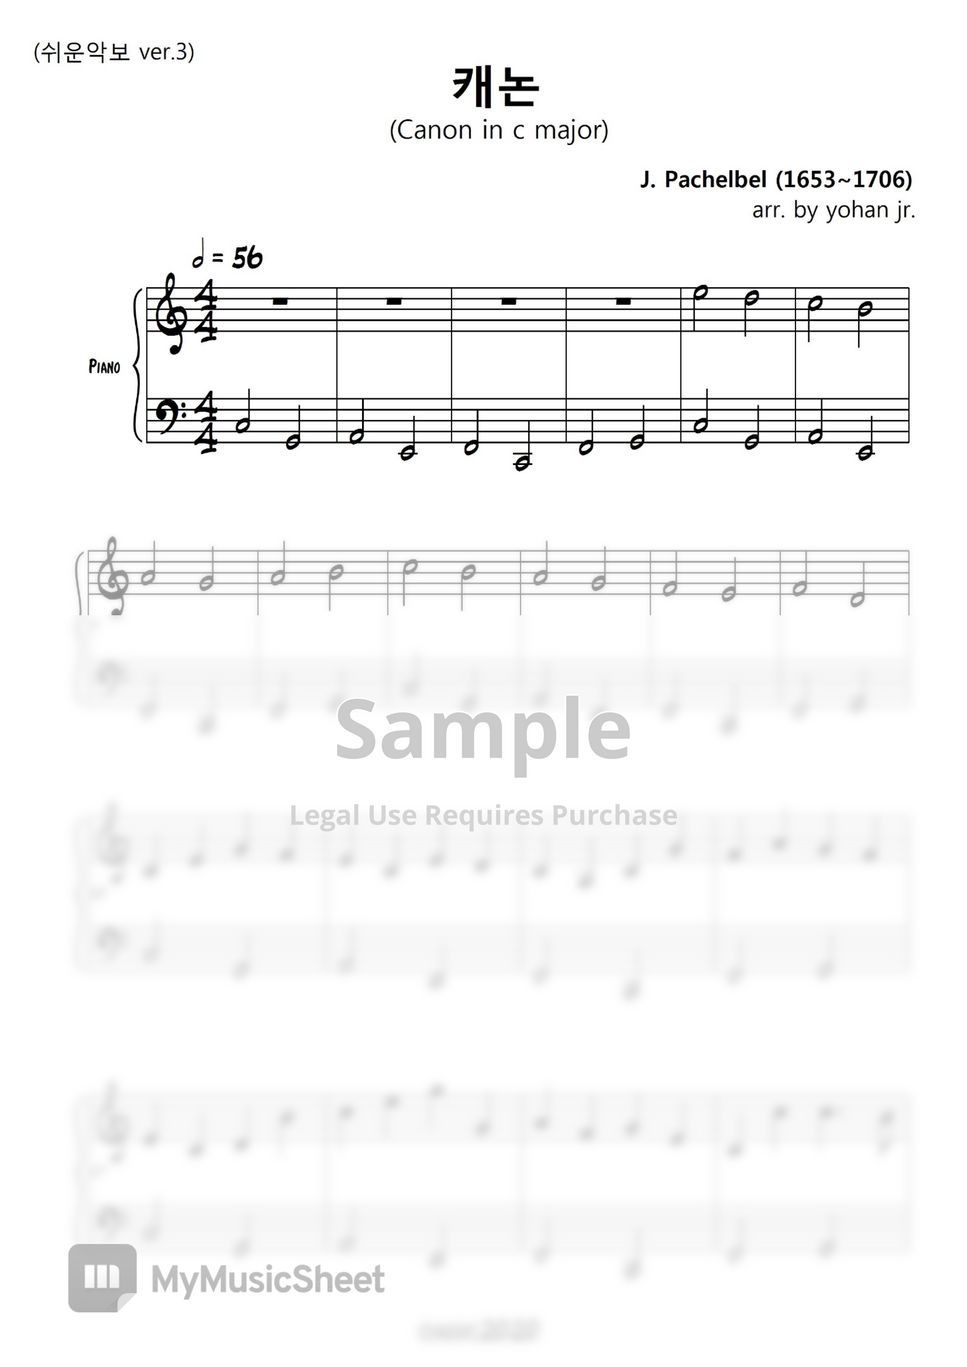 J. Pachelbel - Canon In C (Easy Piano Ver.3) Sheets By Classic2020